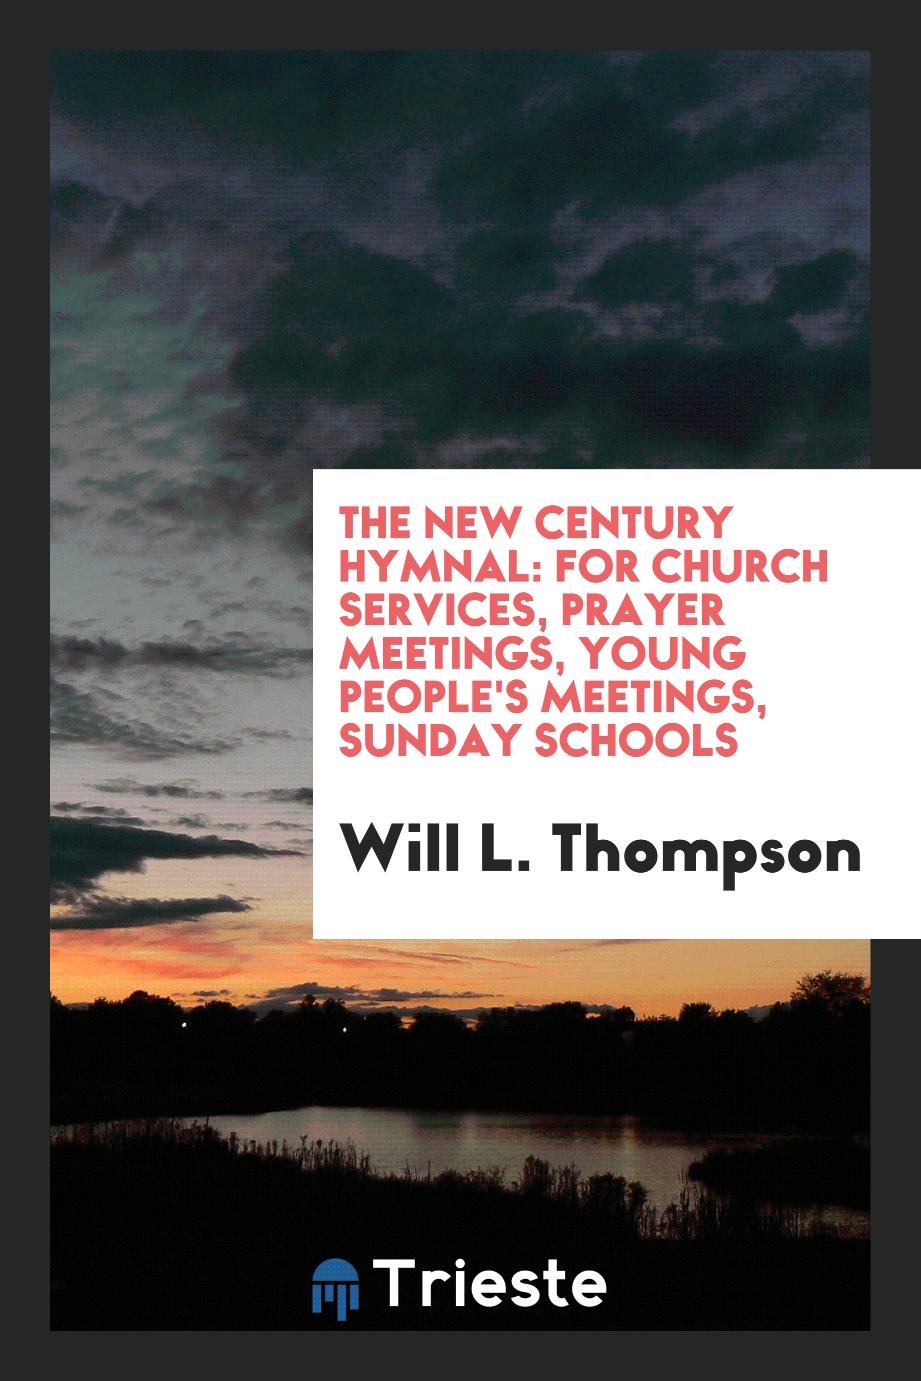 The New Century Hymnal: For Church Services, Prayer Meetings, Young People's Meetings, Sunday Schools